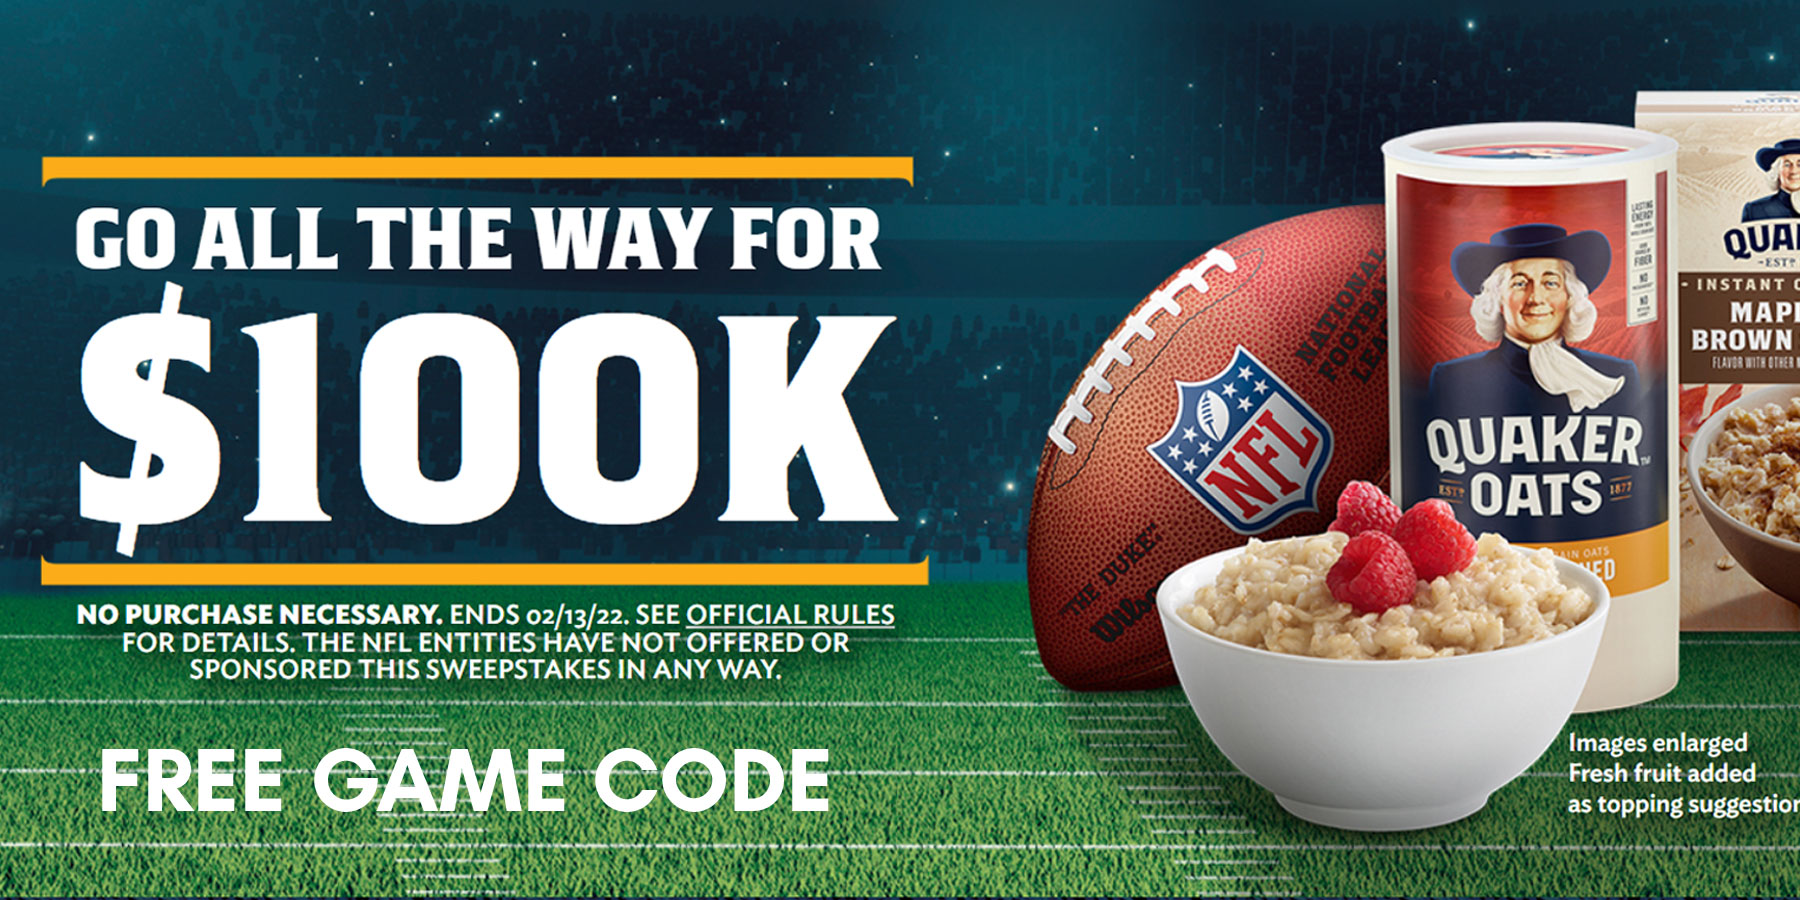 Enter for your chance to win $10,000 from Quaker in the Quaker Oats Touchdown Instant Win Game. Play daily for your chance to win a $100 bank gift card. Get your Free Game Code to play